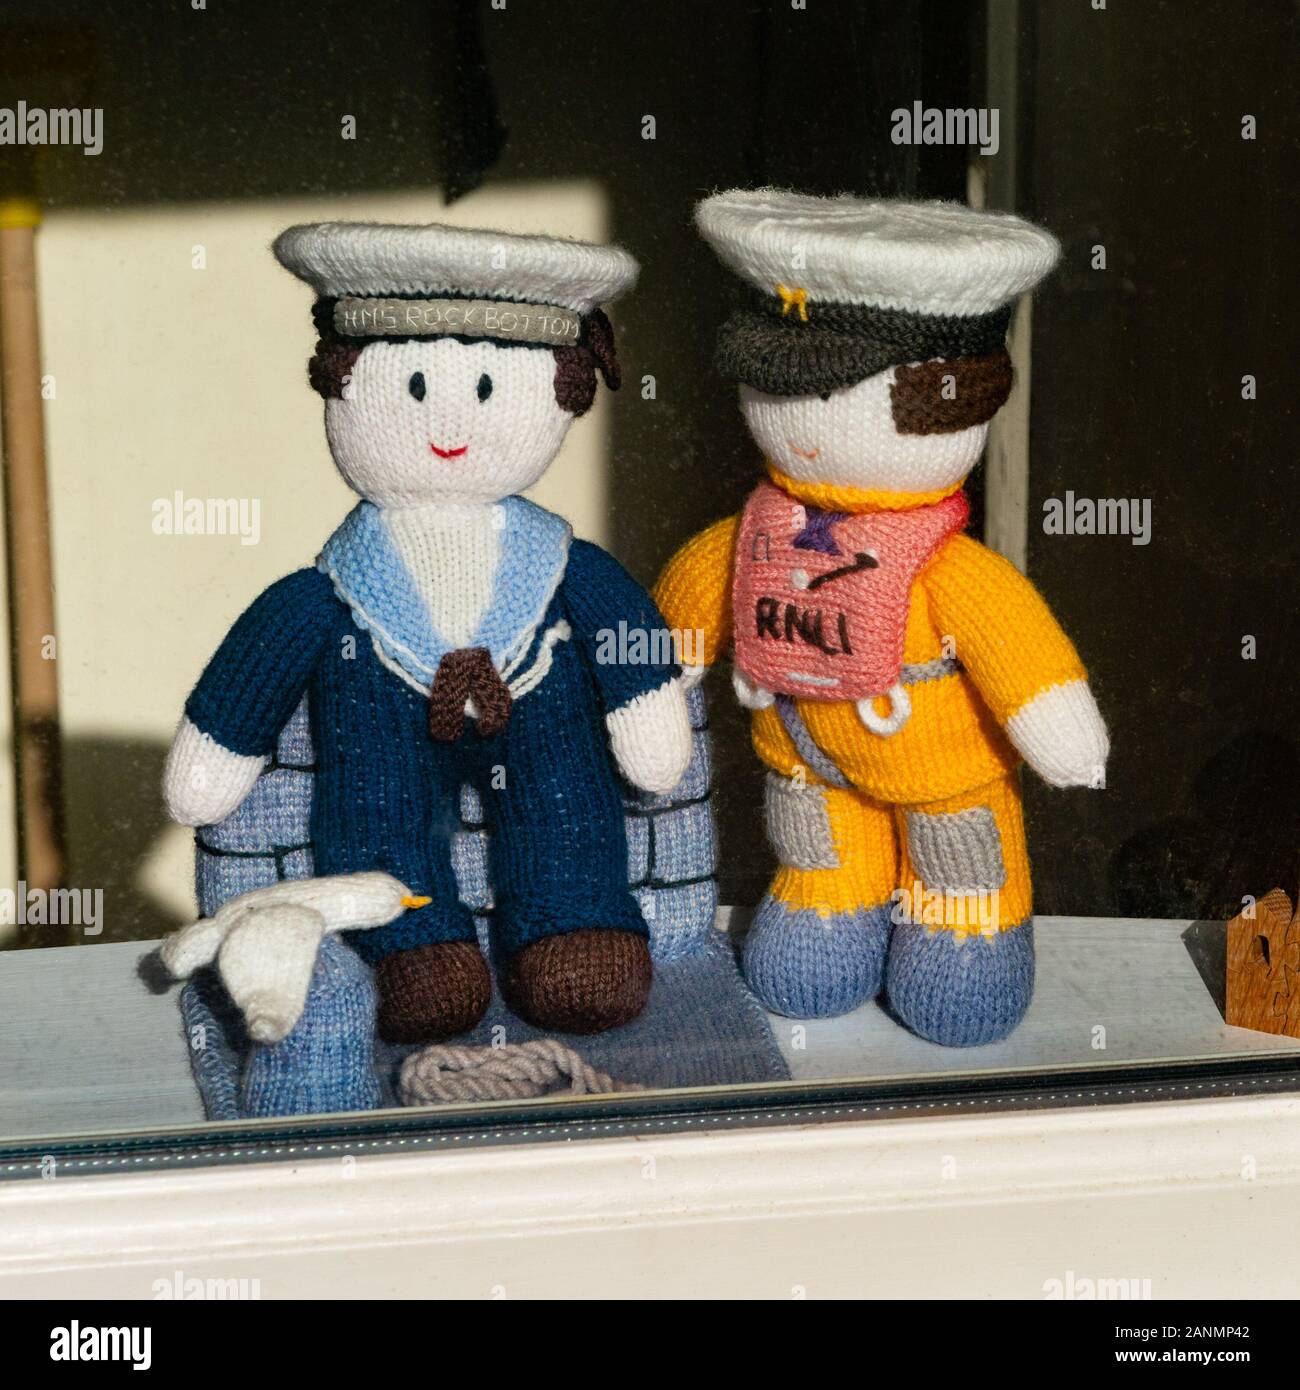 Small knitted handmade sailor and RNLI lifeboatman dolls in their uniforms on display on windowsill, St. Ives, Cornwall, England, UK Stock Photo